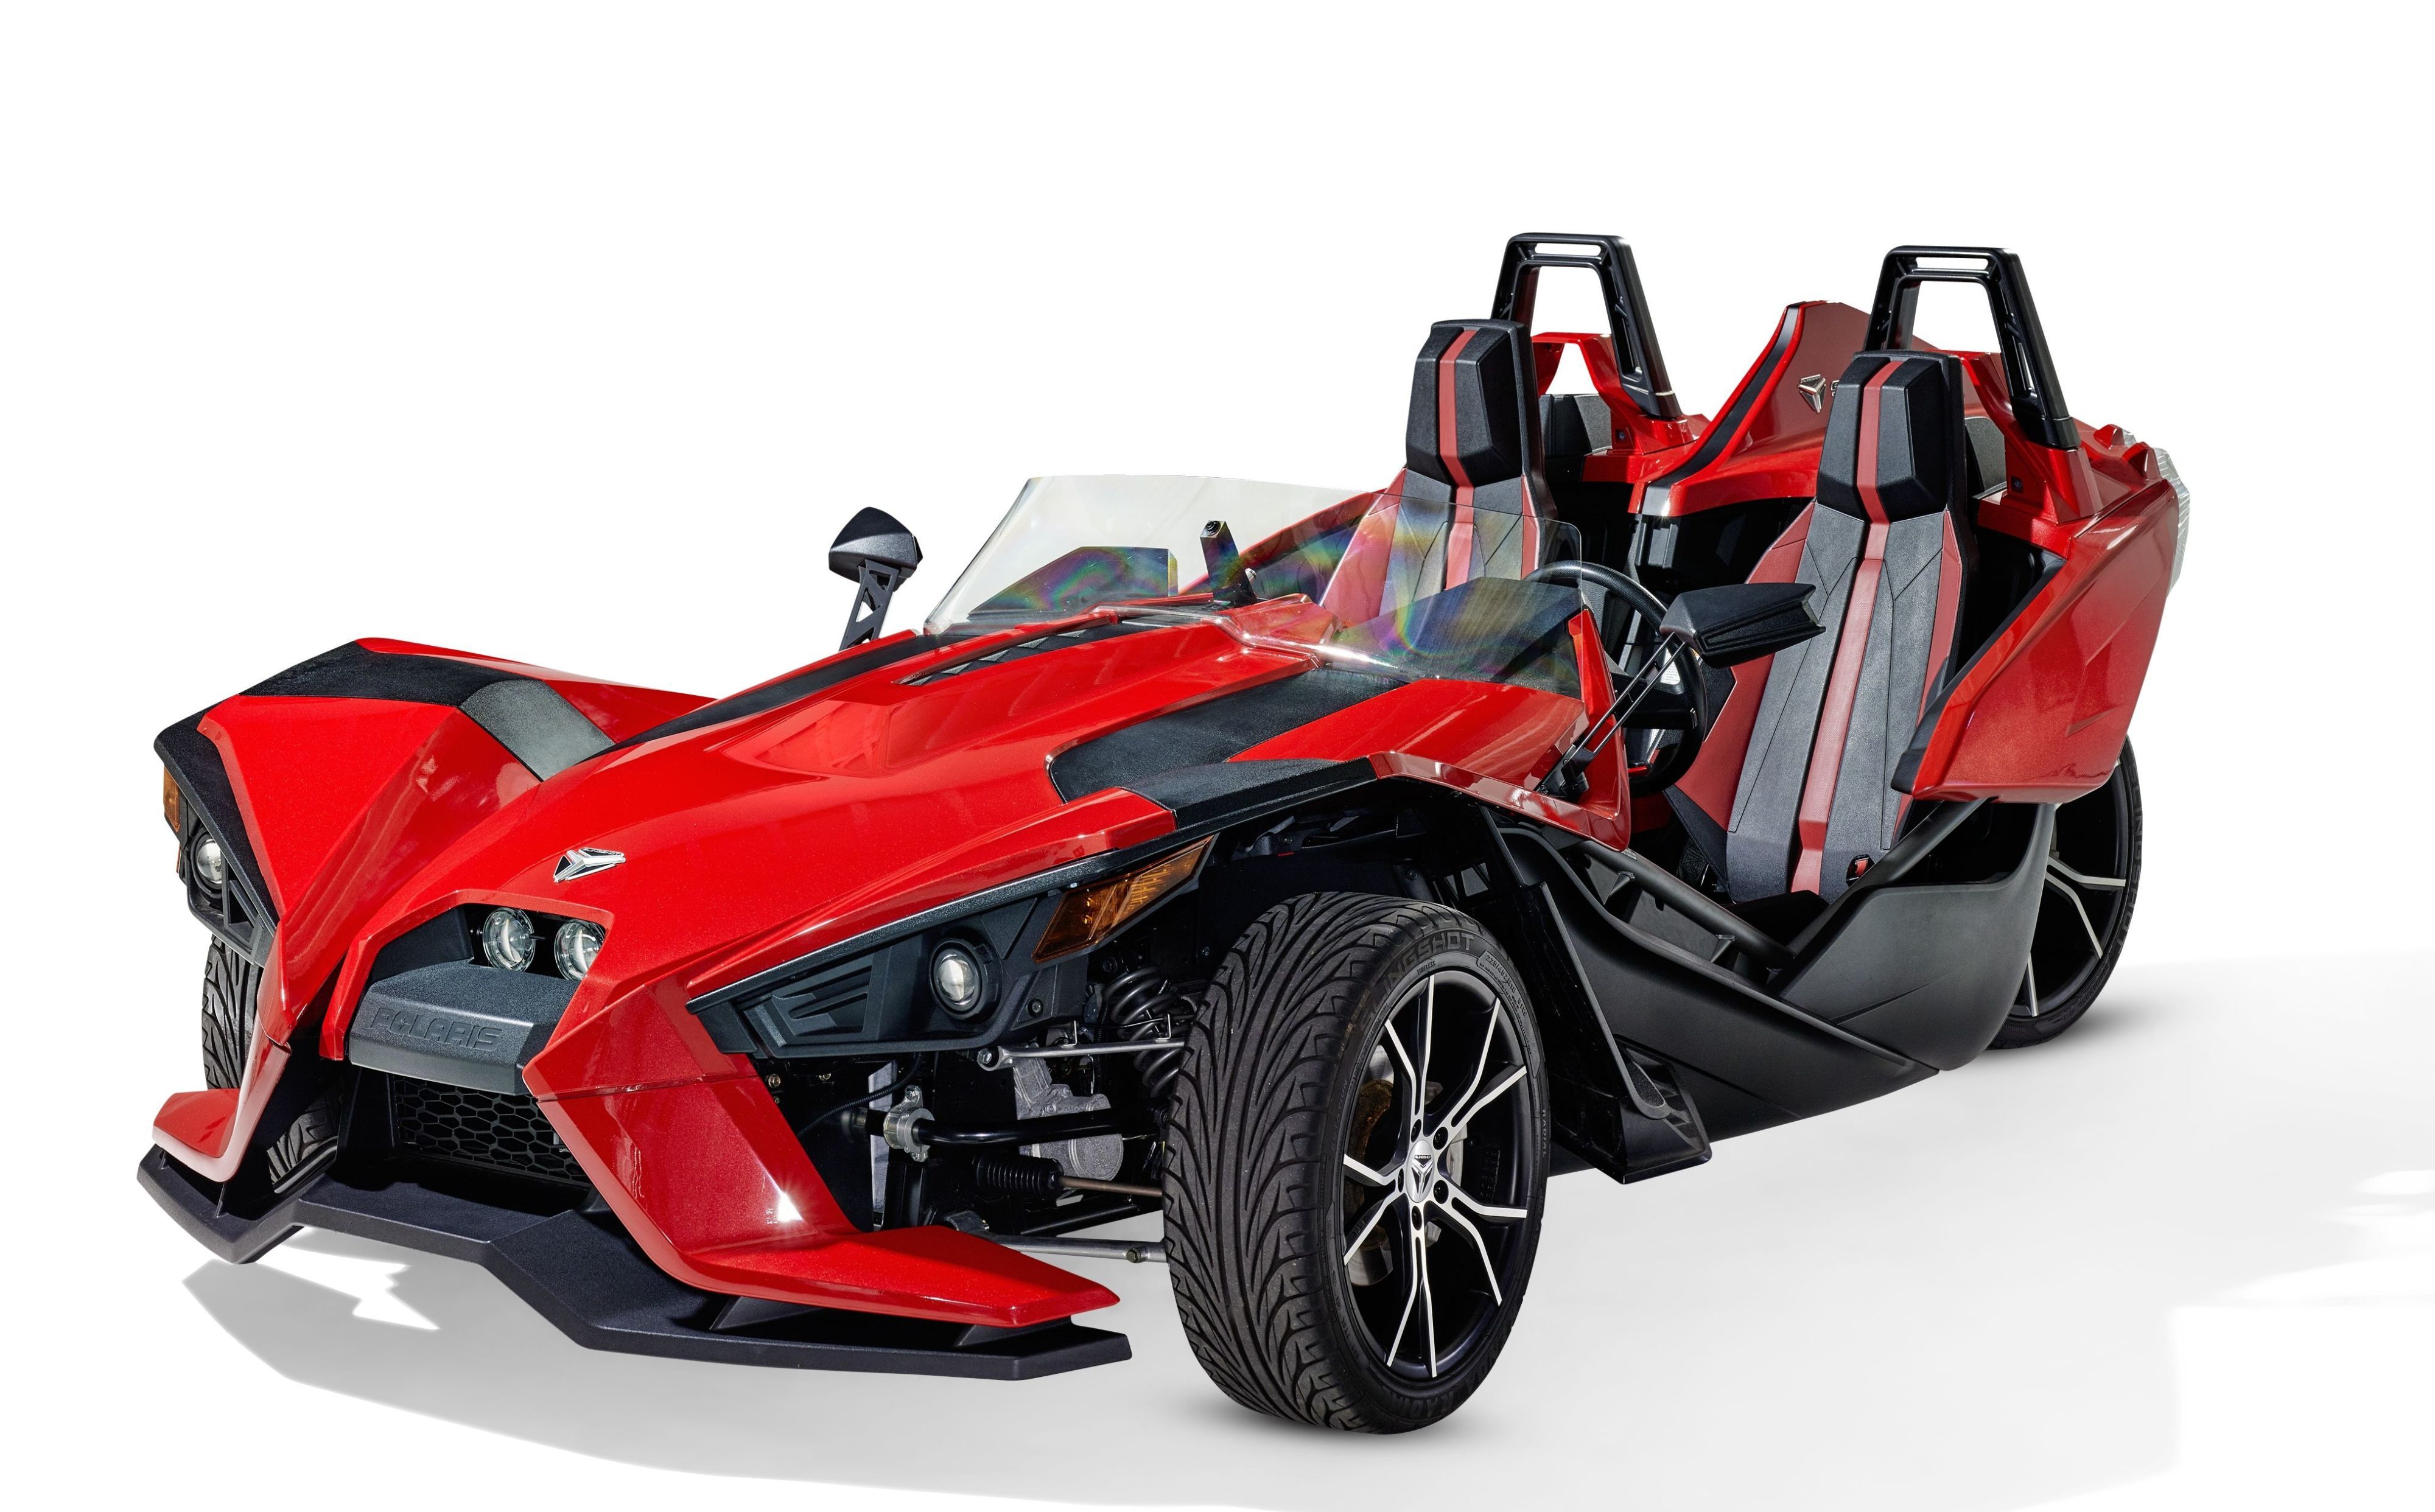 The Polaris Slingshot Is the $20,000 